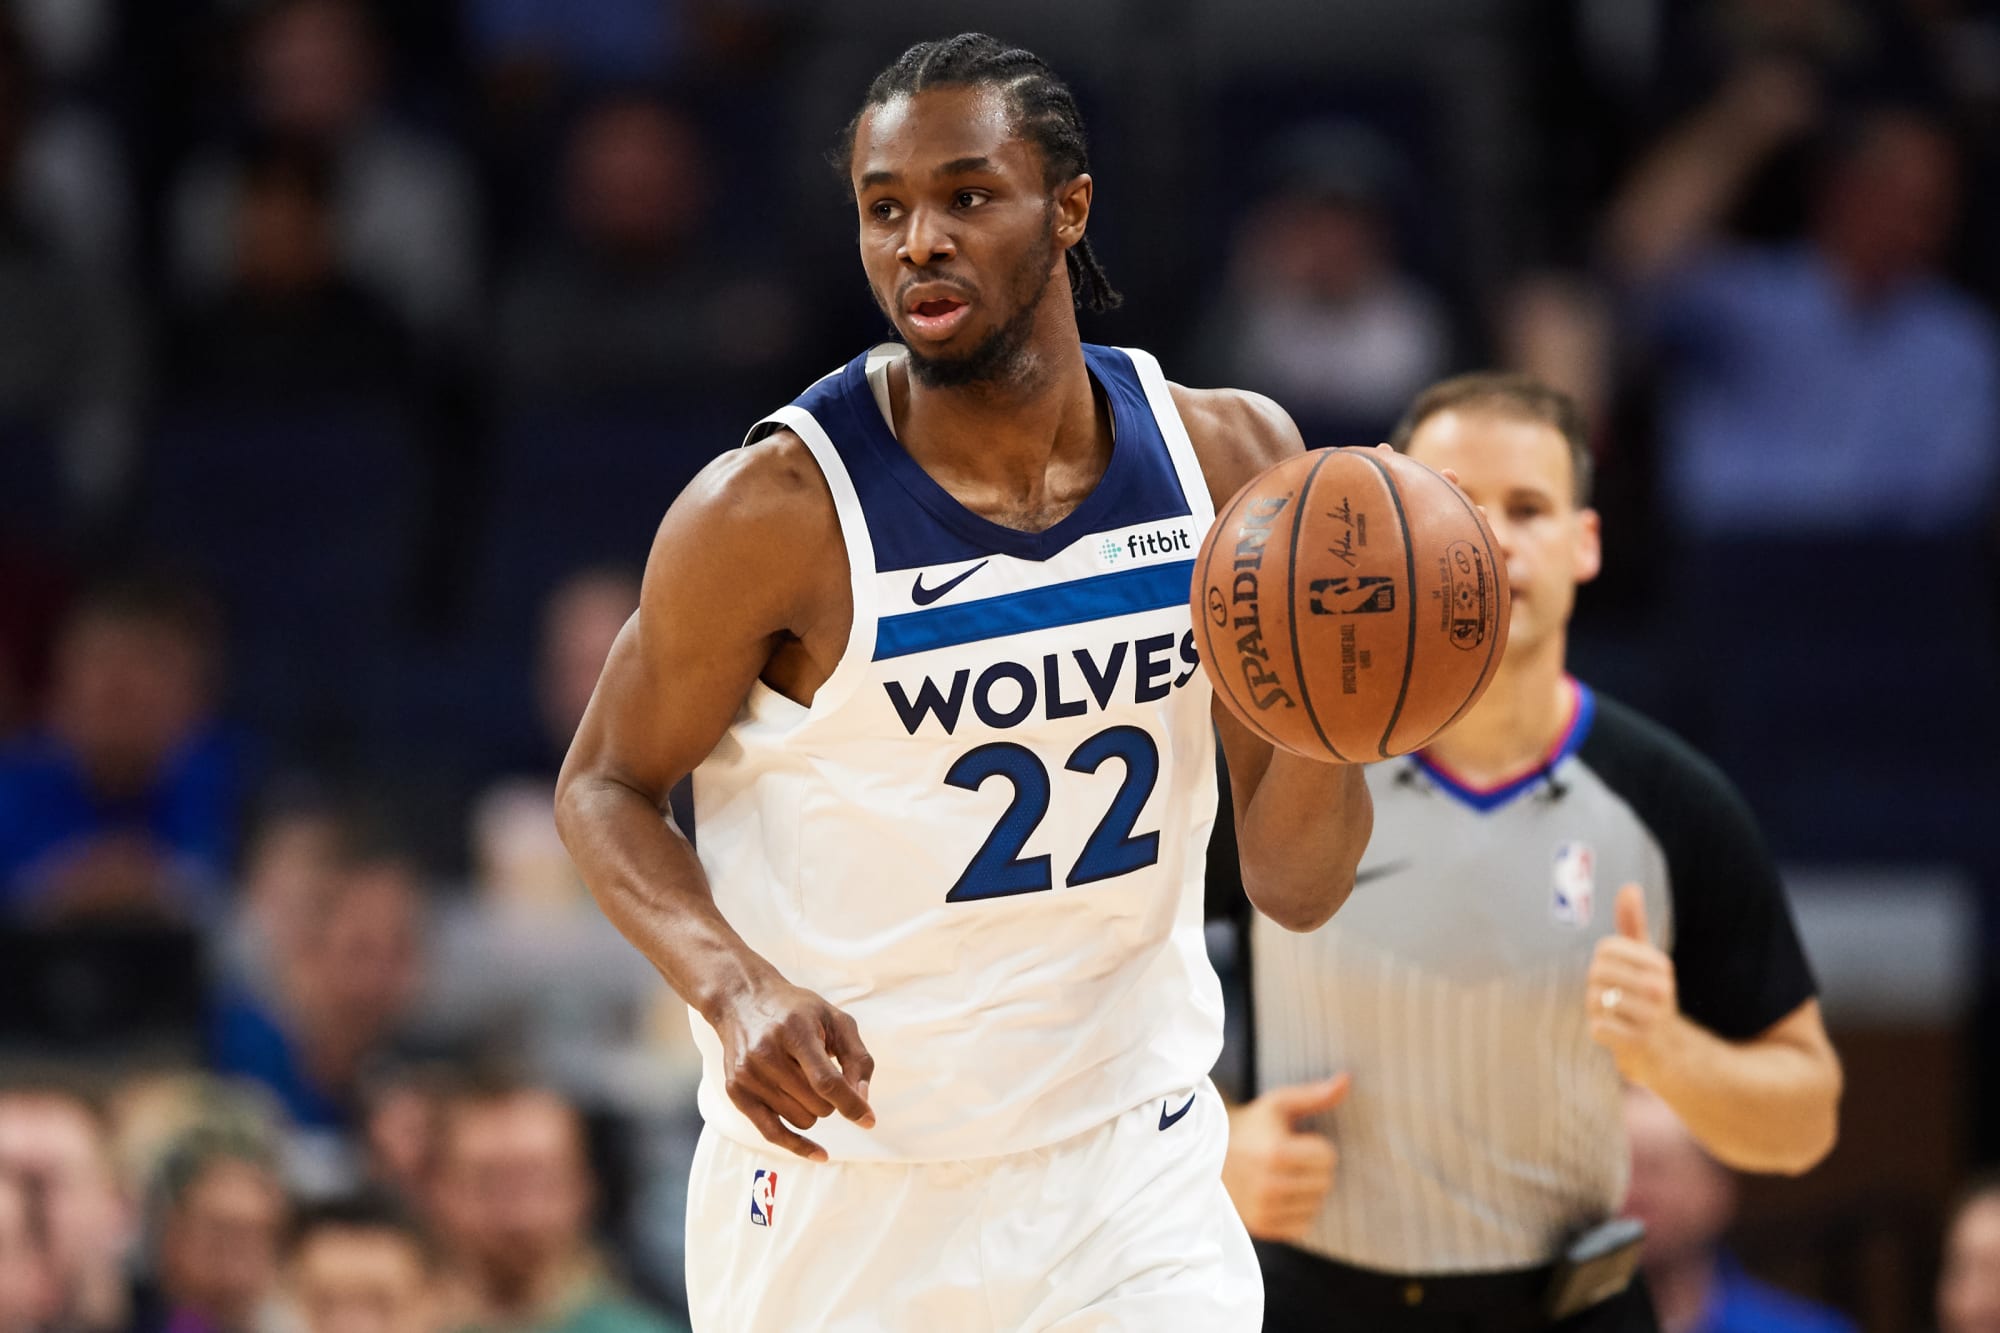 Minnesota Timberwolves On Andrew Wiggins' improved play